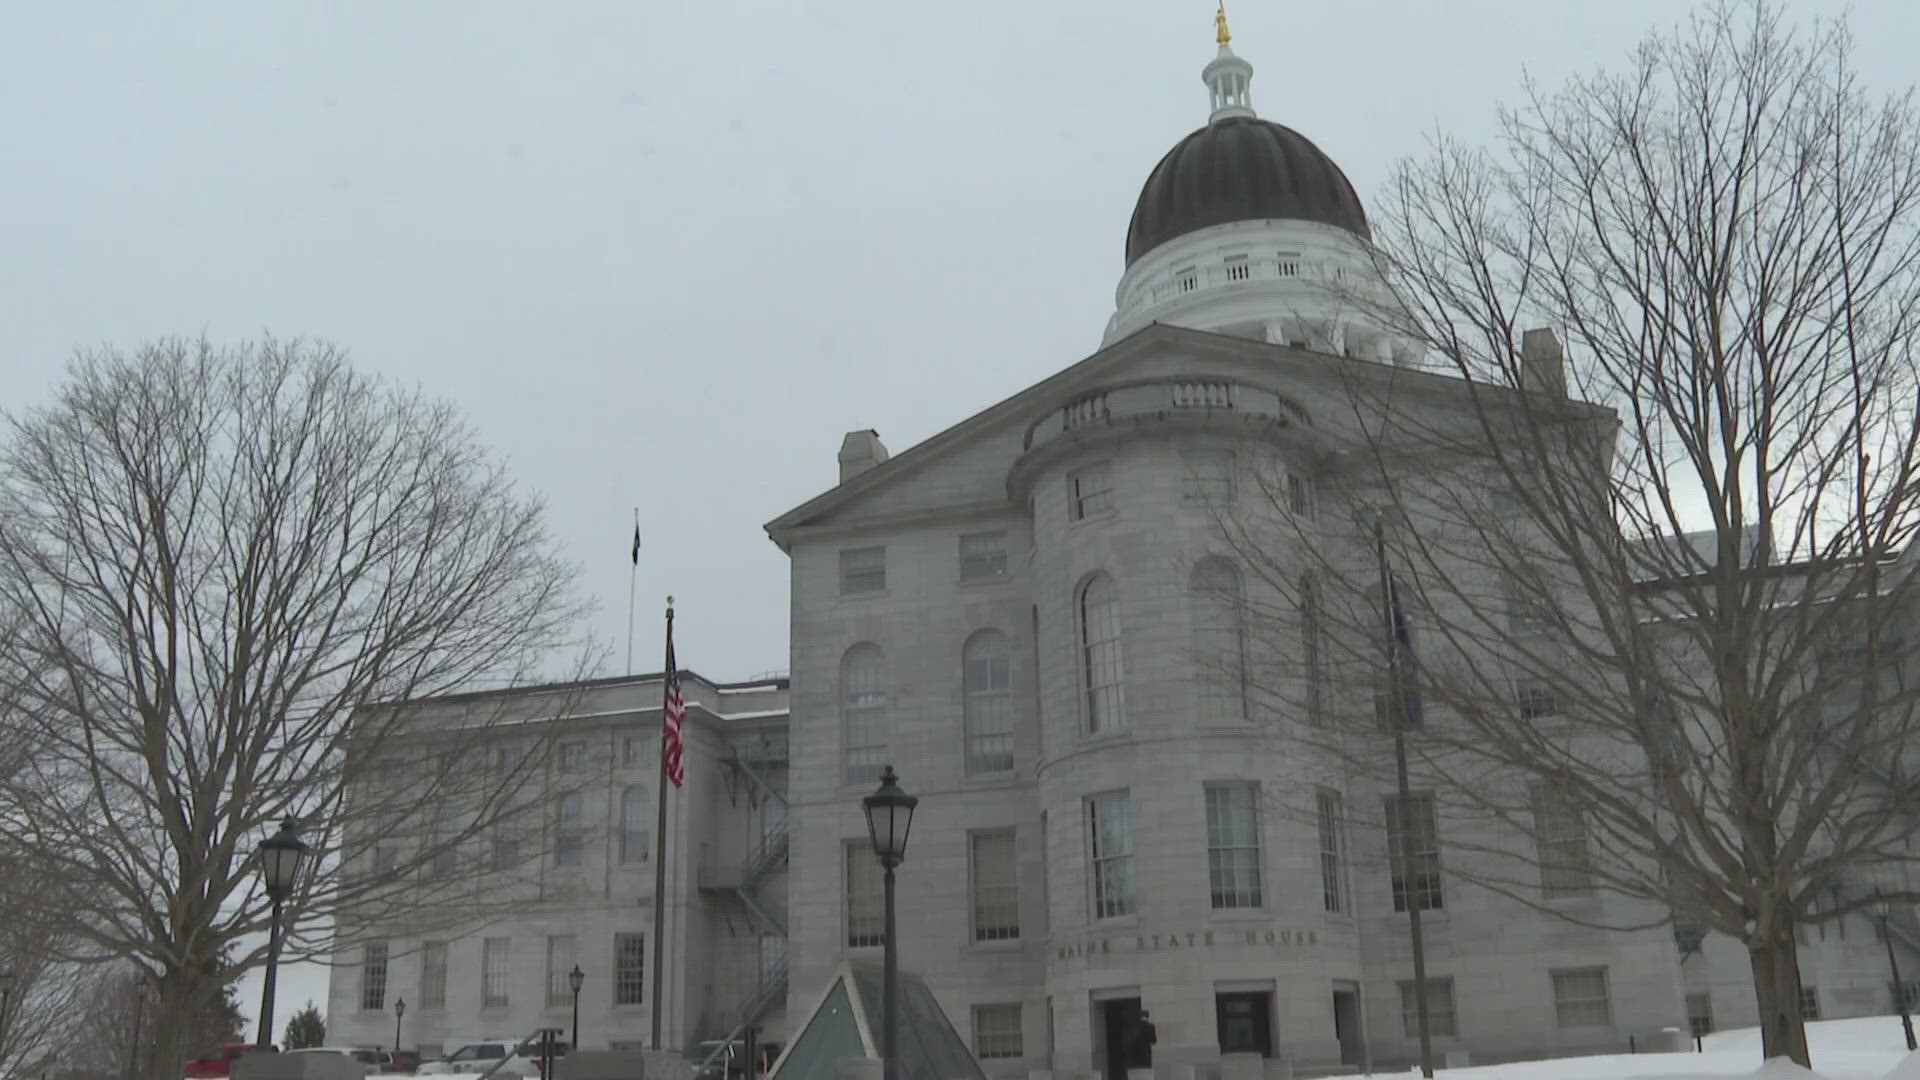 The Maine Paid Leave Coalition is hosting its "day of action" at the State House on Tuesday, Feb. 7.